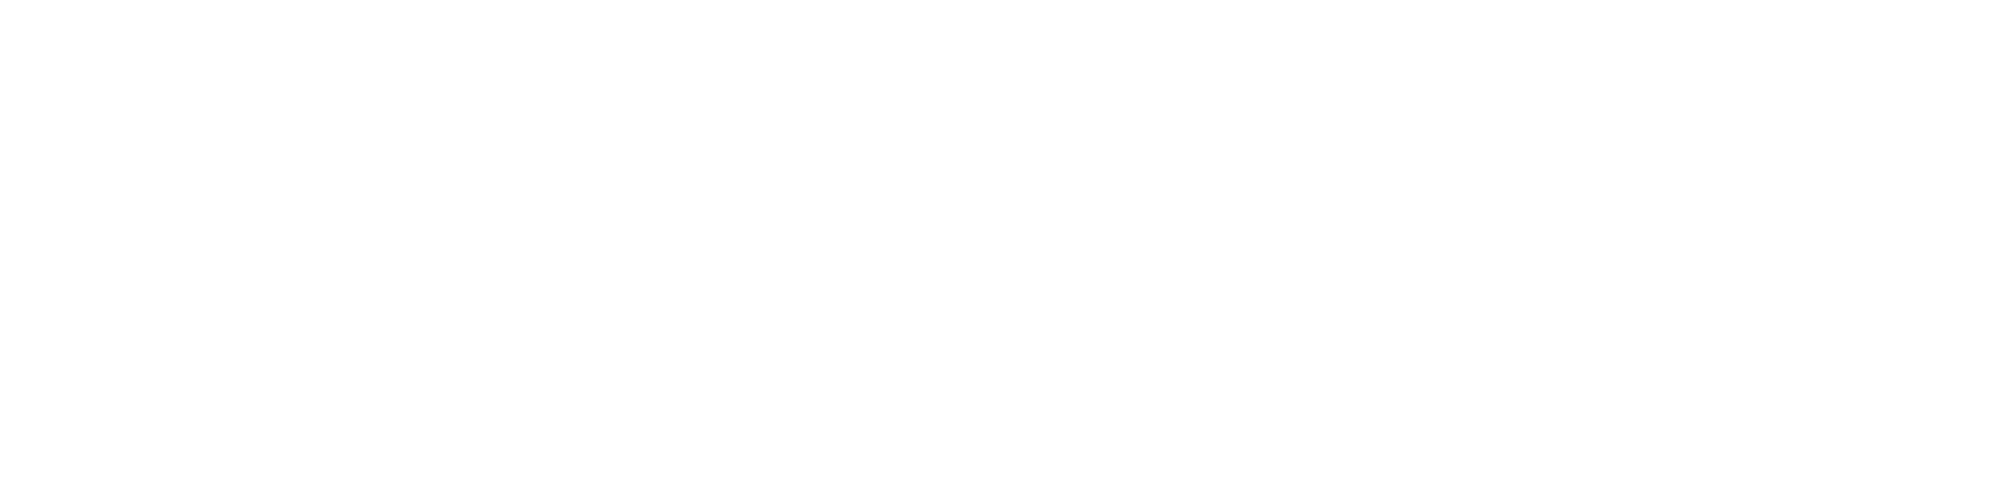 The Right Turn